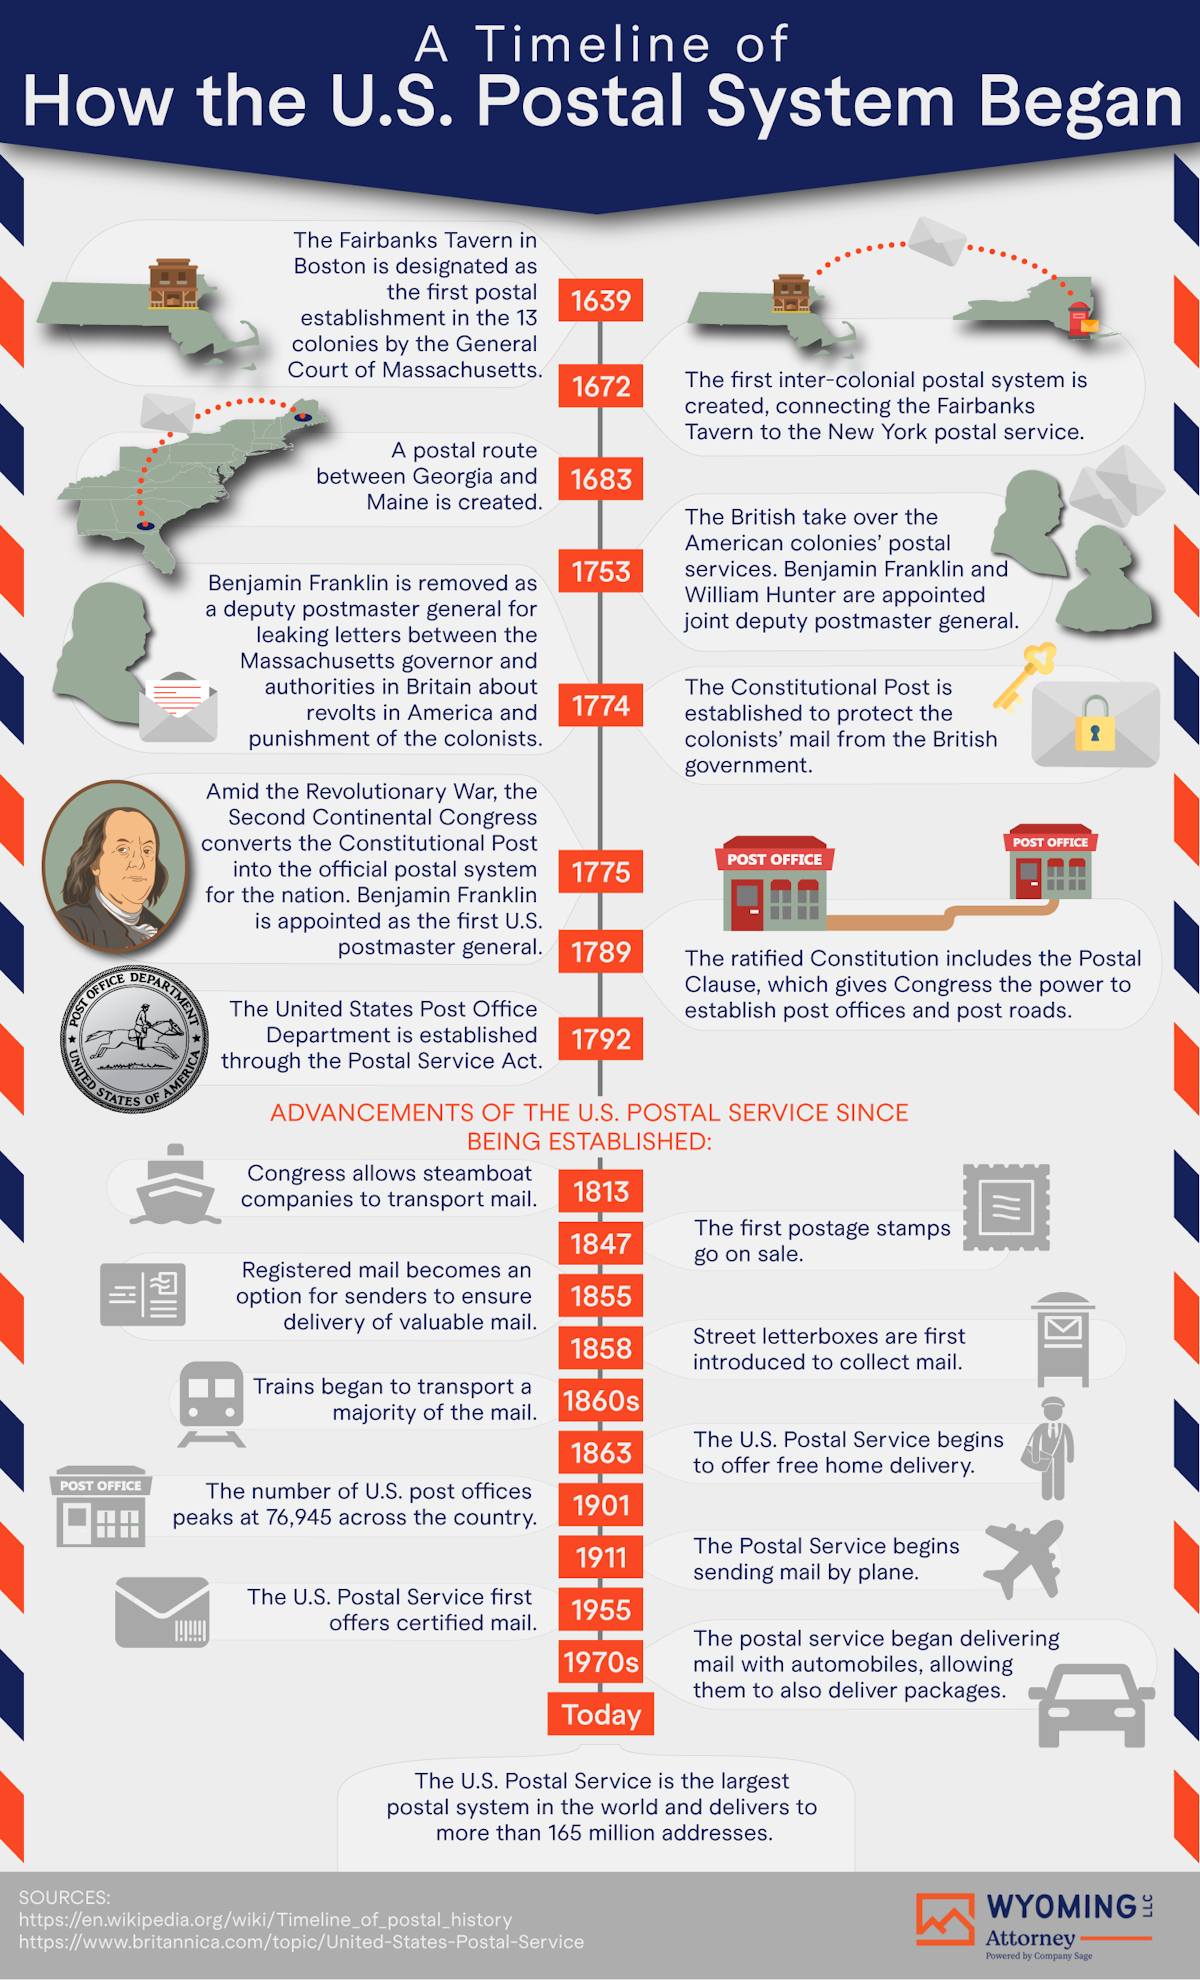  The Second Continental Congress and the U.S. Postal System: A Boon for Businesses and All Americans - Infographic